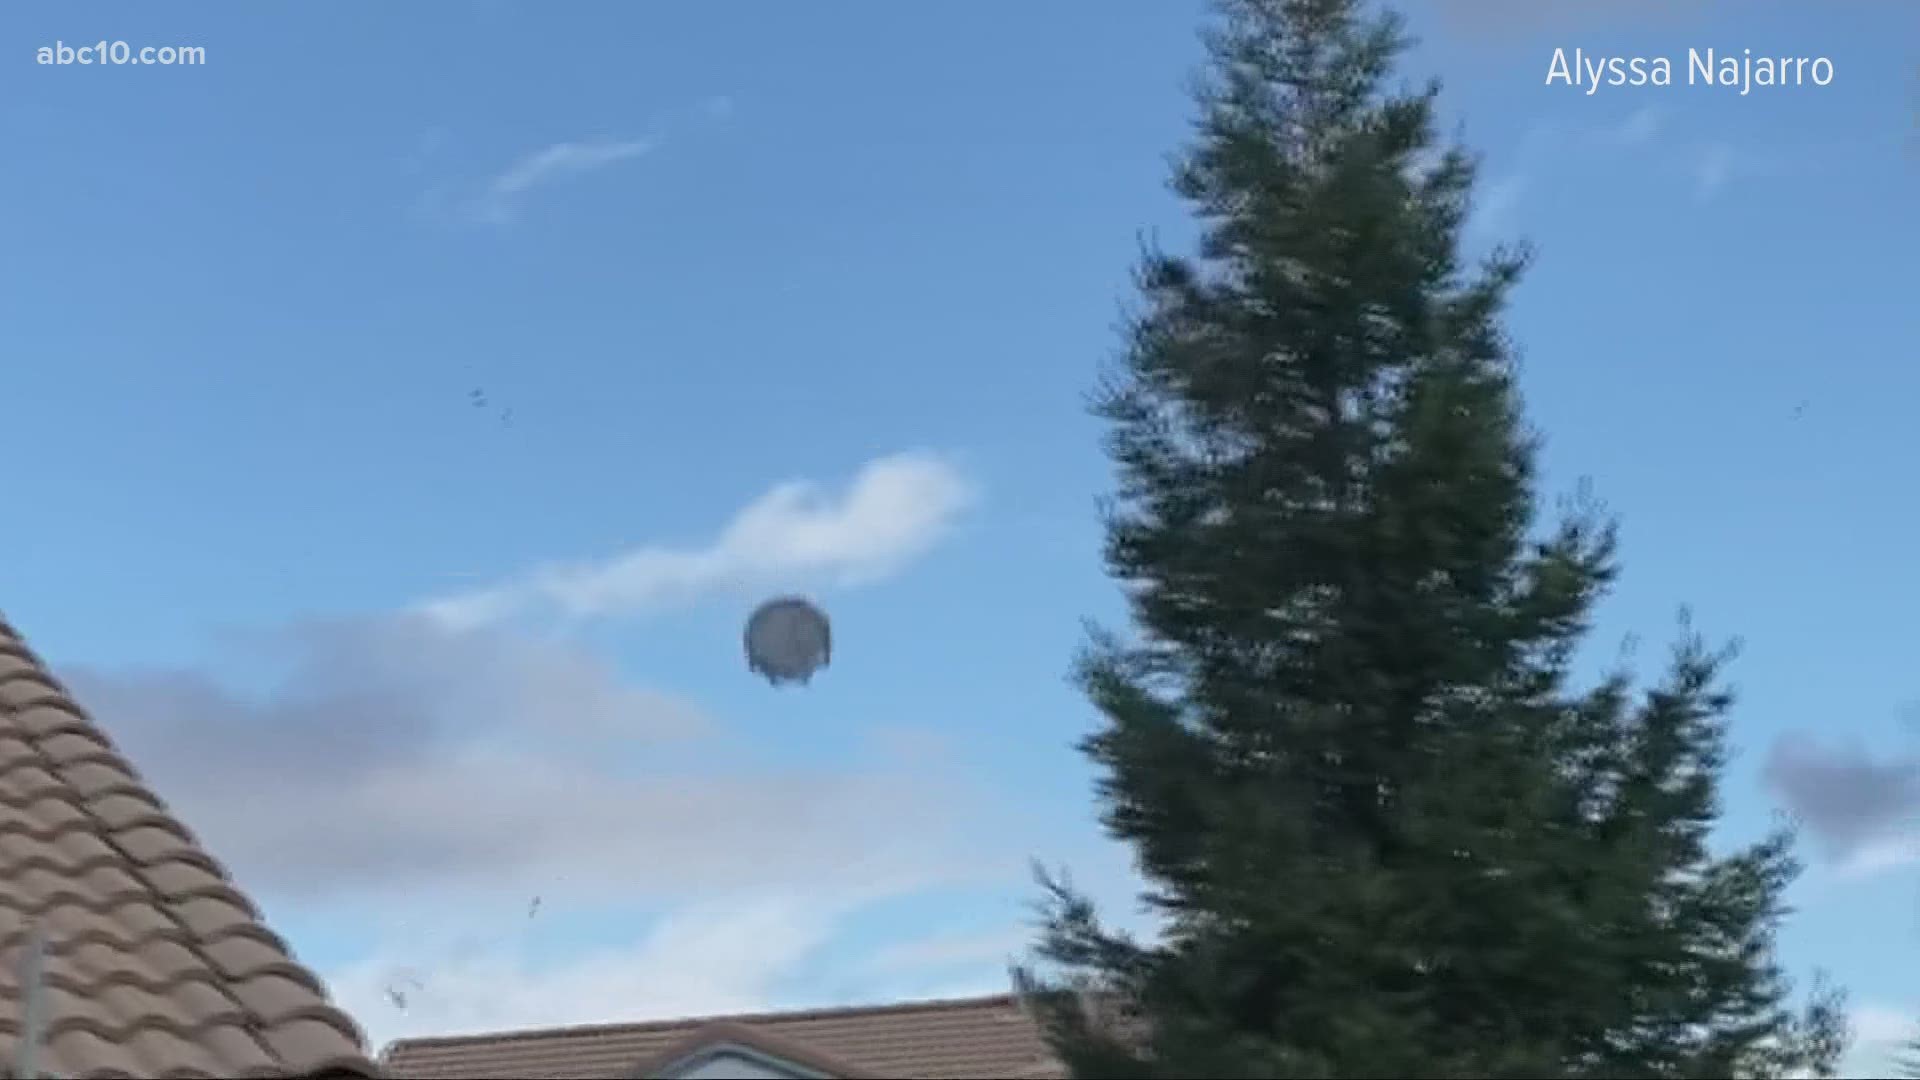 A family from Lincoln captured a trampoline being carried away by wind after they heard a large noise from the home that sounded like someone throwing stuff outside.